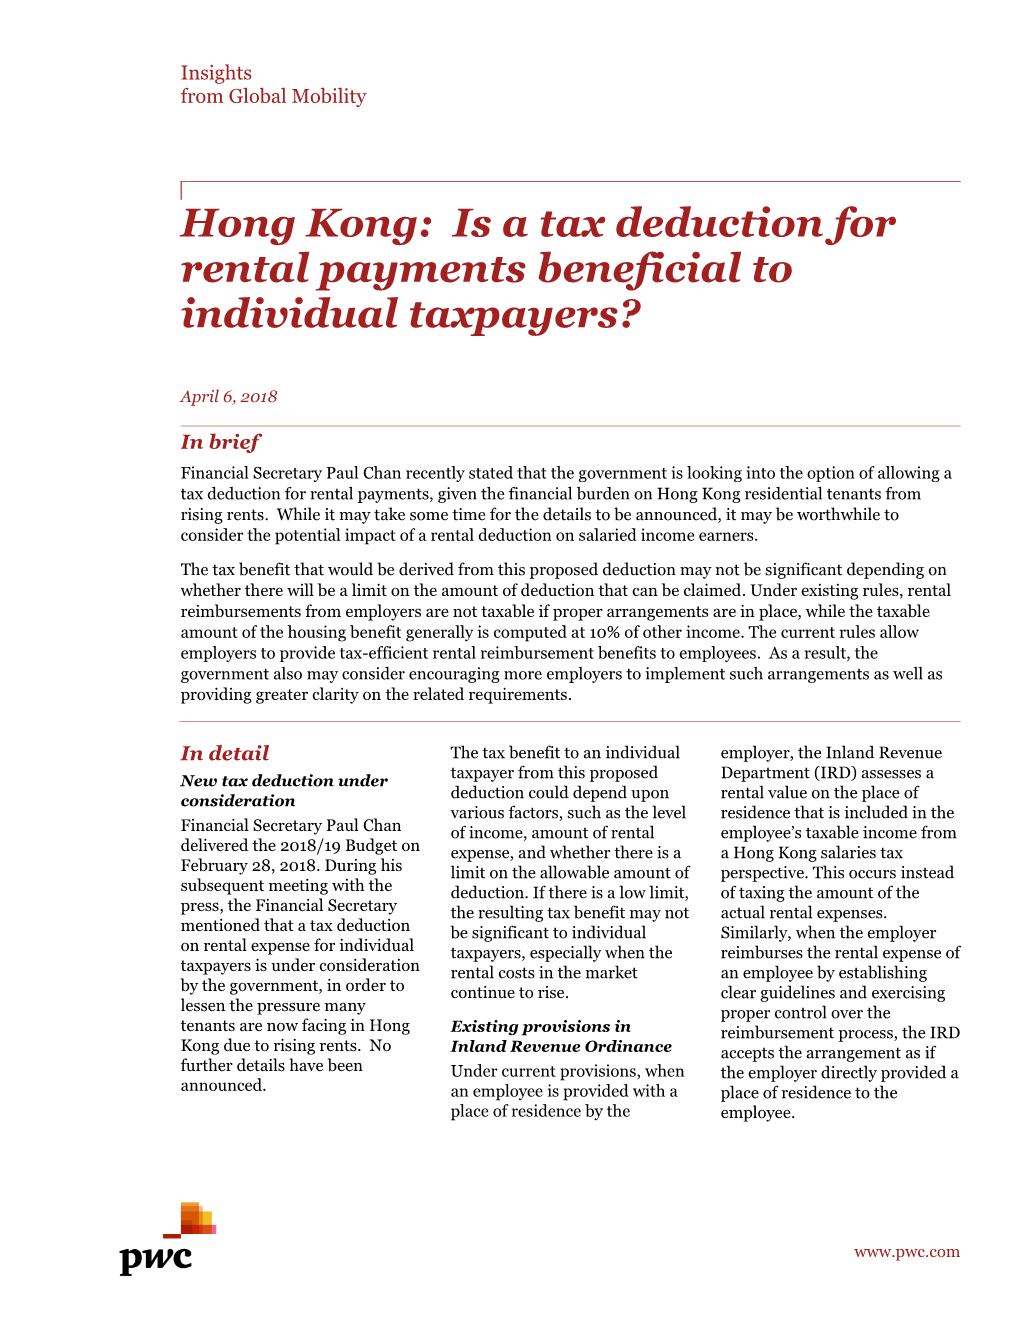 Hong Kong: Is a Tax Deduction for Rental Payments Beneficial to Individual Taxpayers?